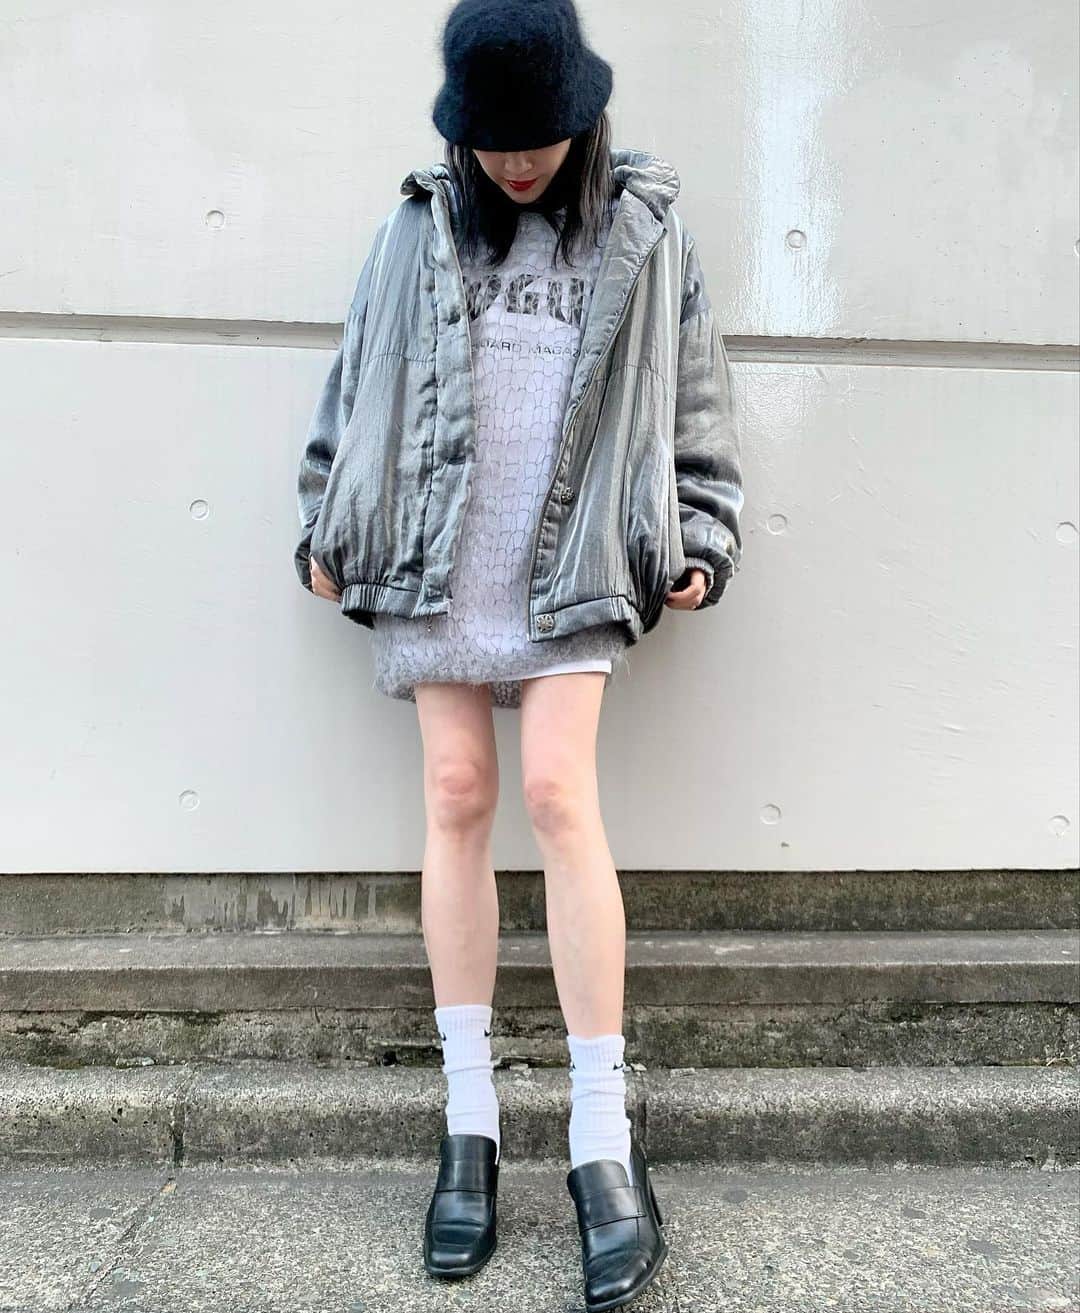 birthdeathのインスタグラム：「New Arrivals  80's Metallic gray puffer jacket  TOFFS - Gray hand knitted mohair fishnet sweater  90's Black angora bucket hat  90's Black  leather loafers  #birthdeath #vintage」